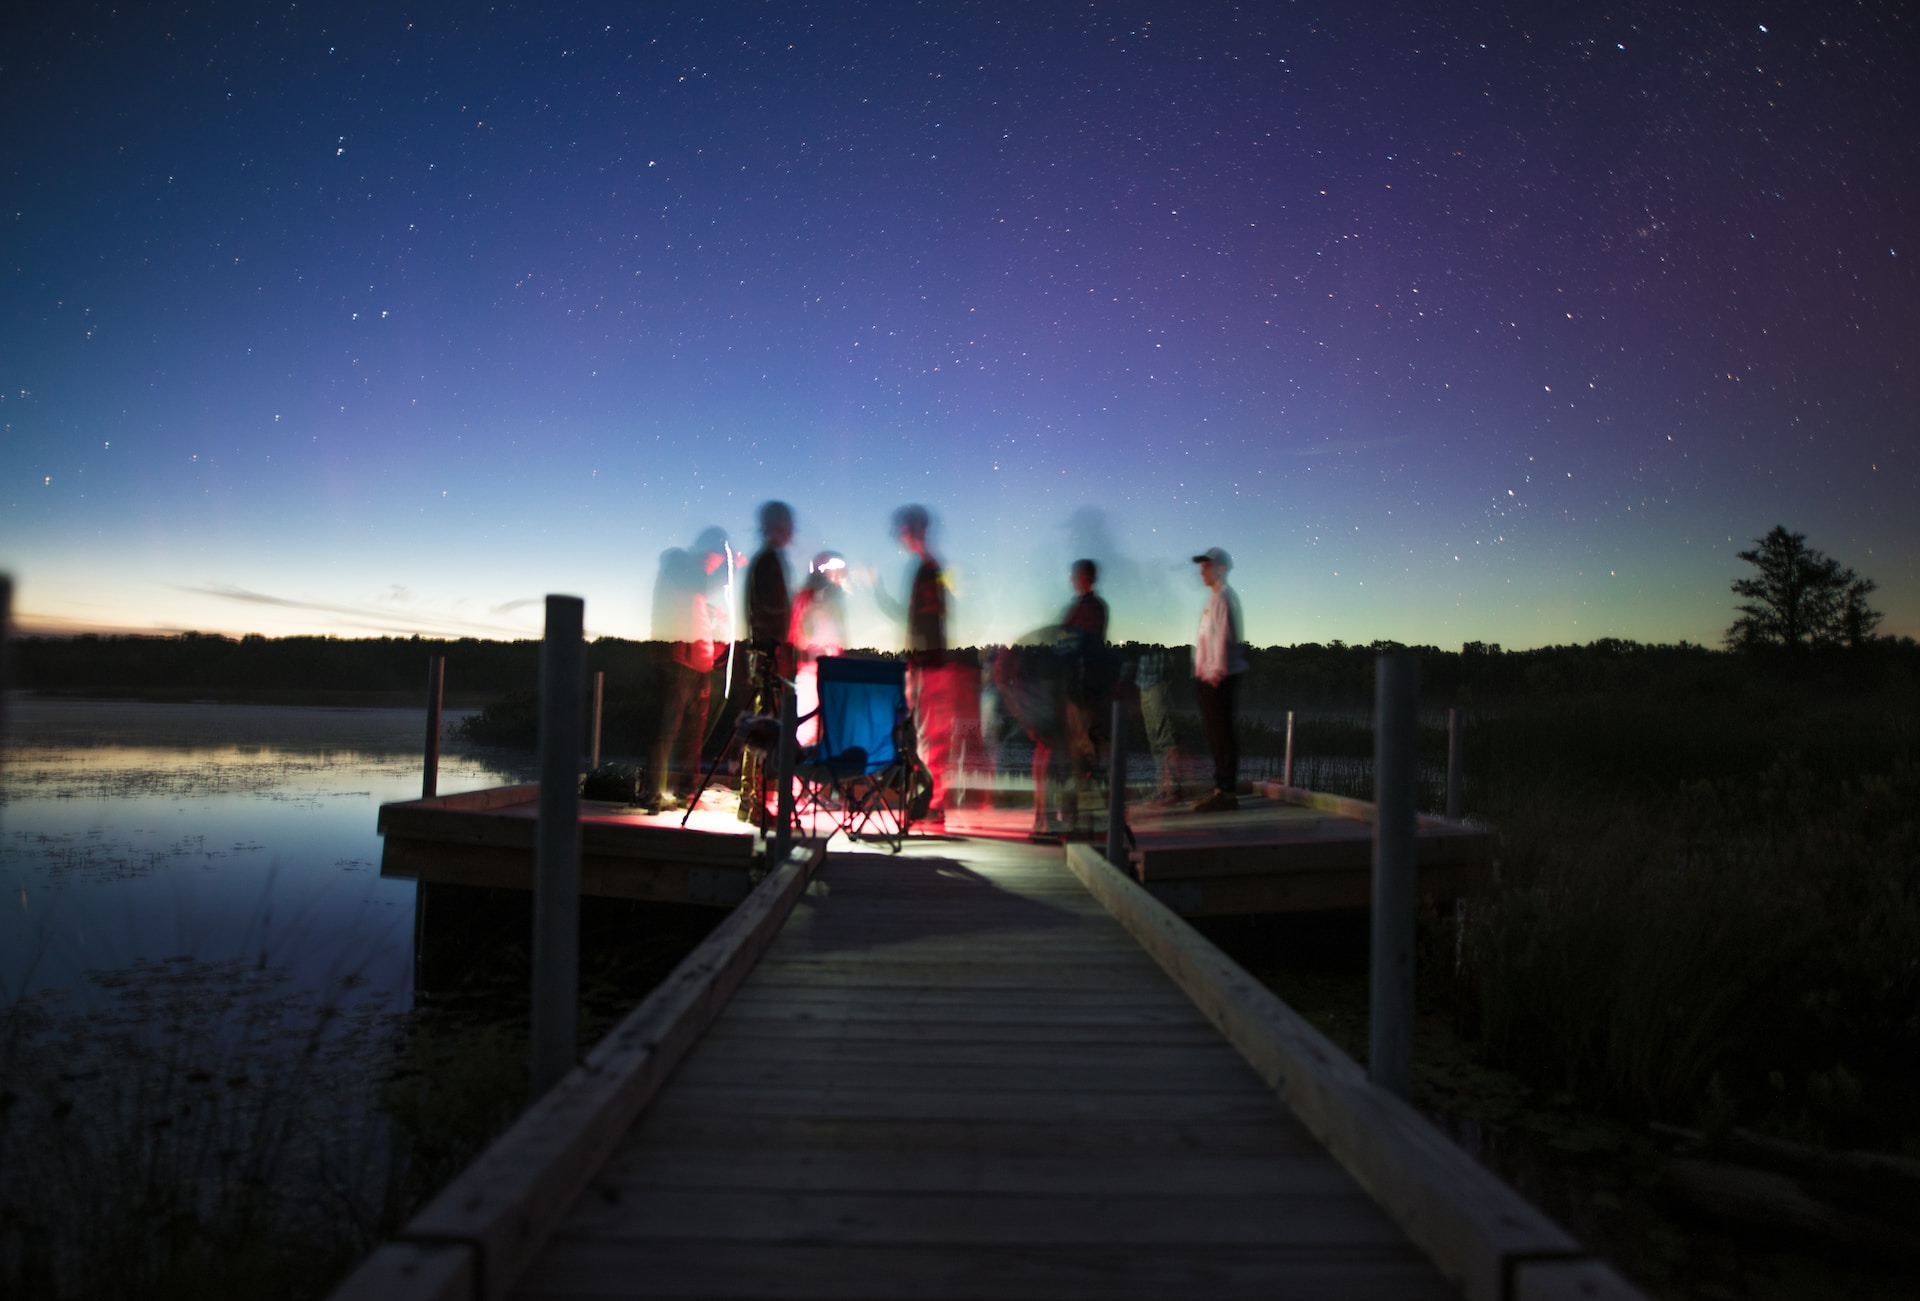 Timelapse of stargazers by a lake